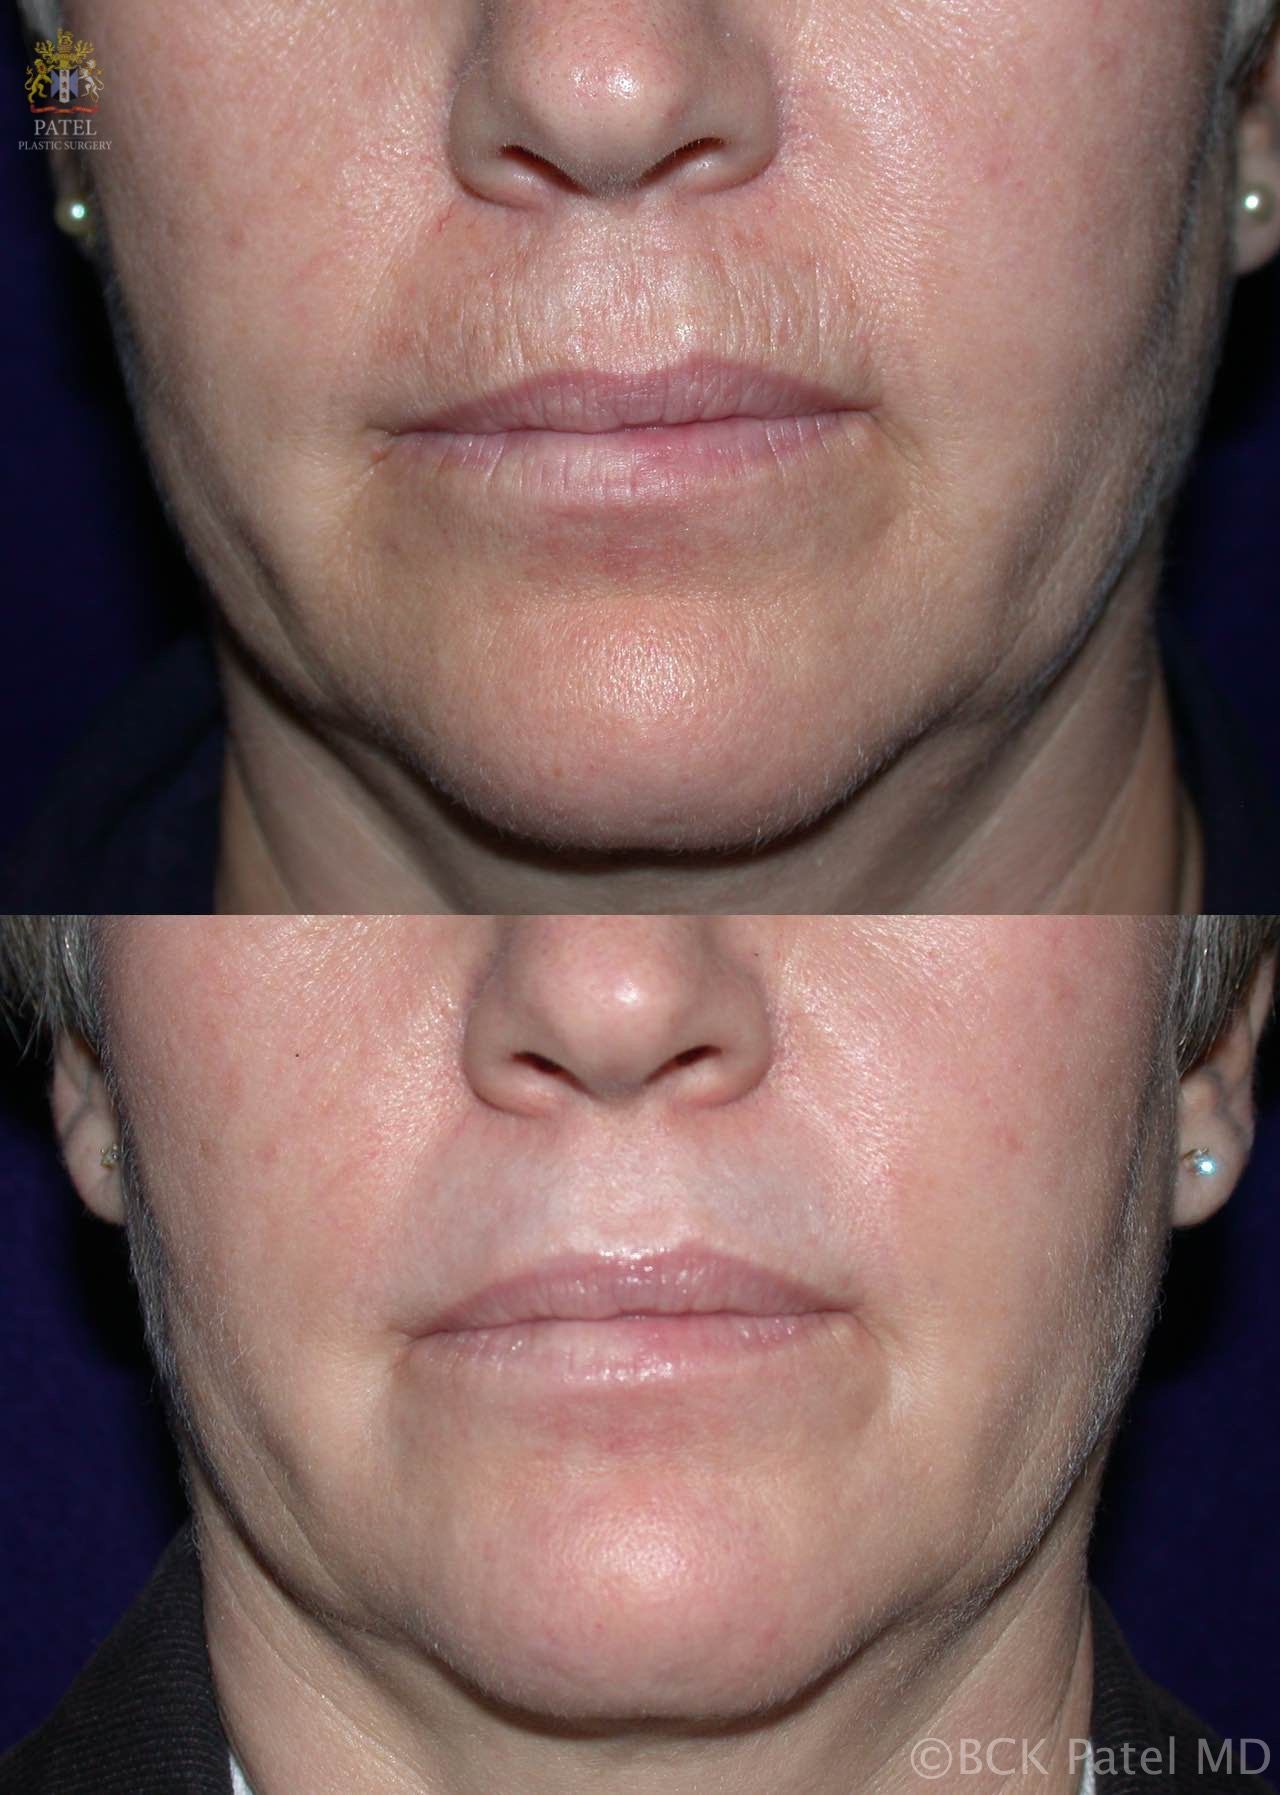 englishsurgeon.com. Nice improvement in the smoker's lines around the mouth, marionette lines after CO2 laser by Dr. BCK Patel MD, FRCS, Salt Lake City, London, St George